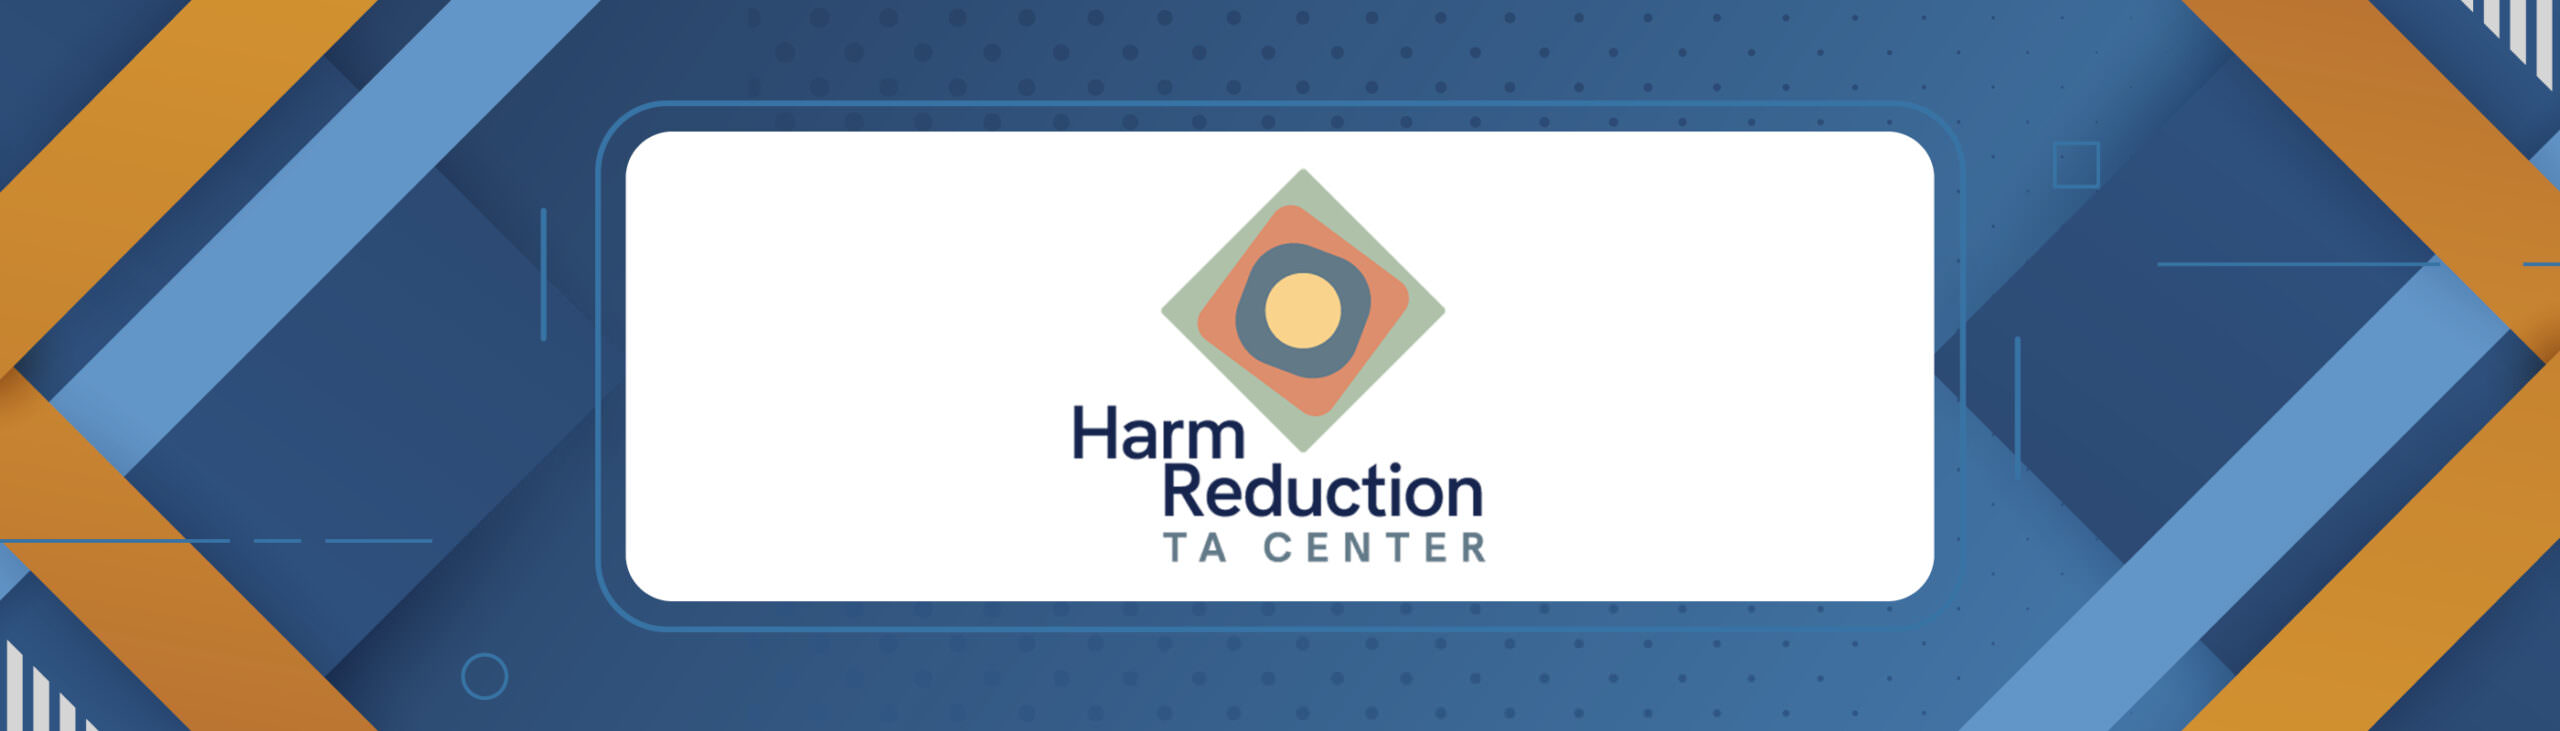 Harm Reduction TA Center featured image for events calendar